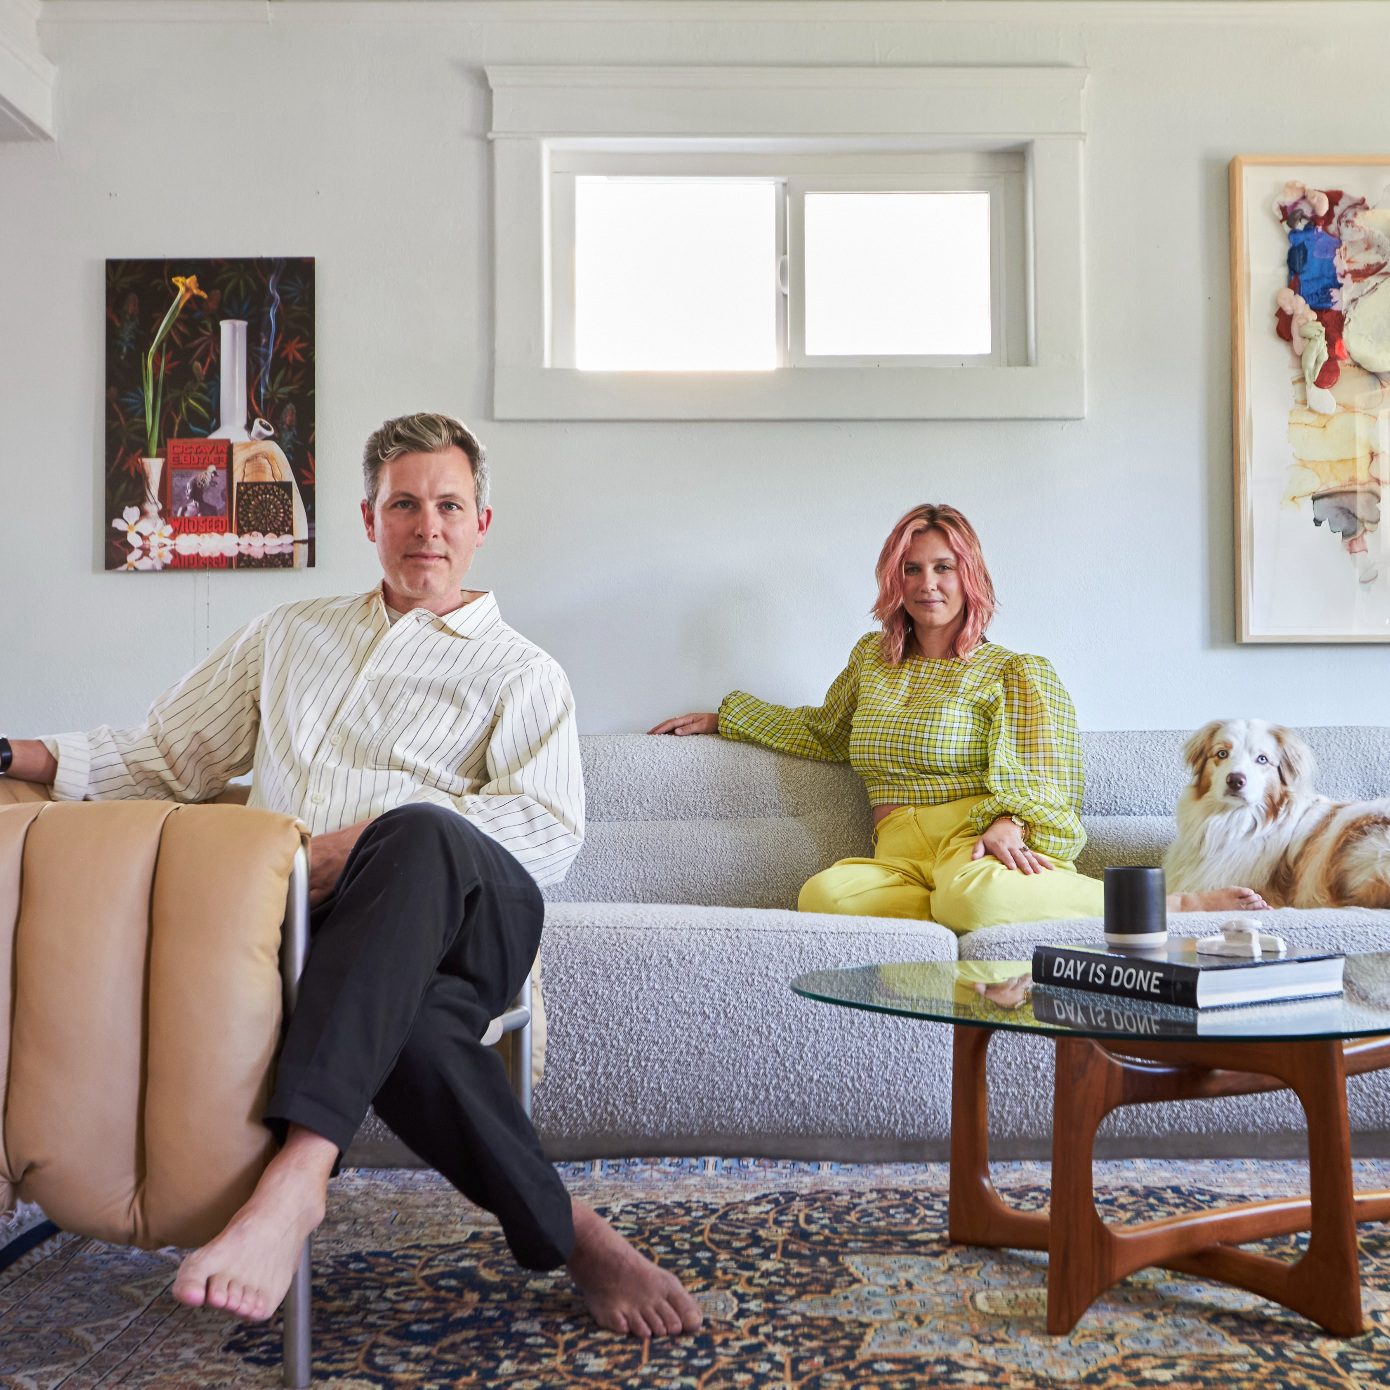 A man, woman and dog sitting in a living room.